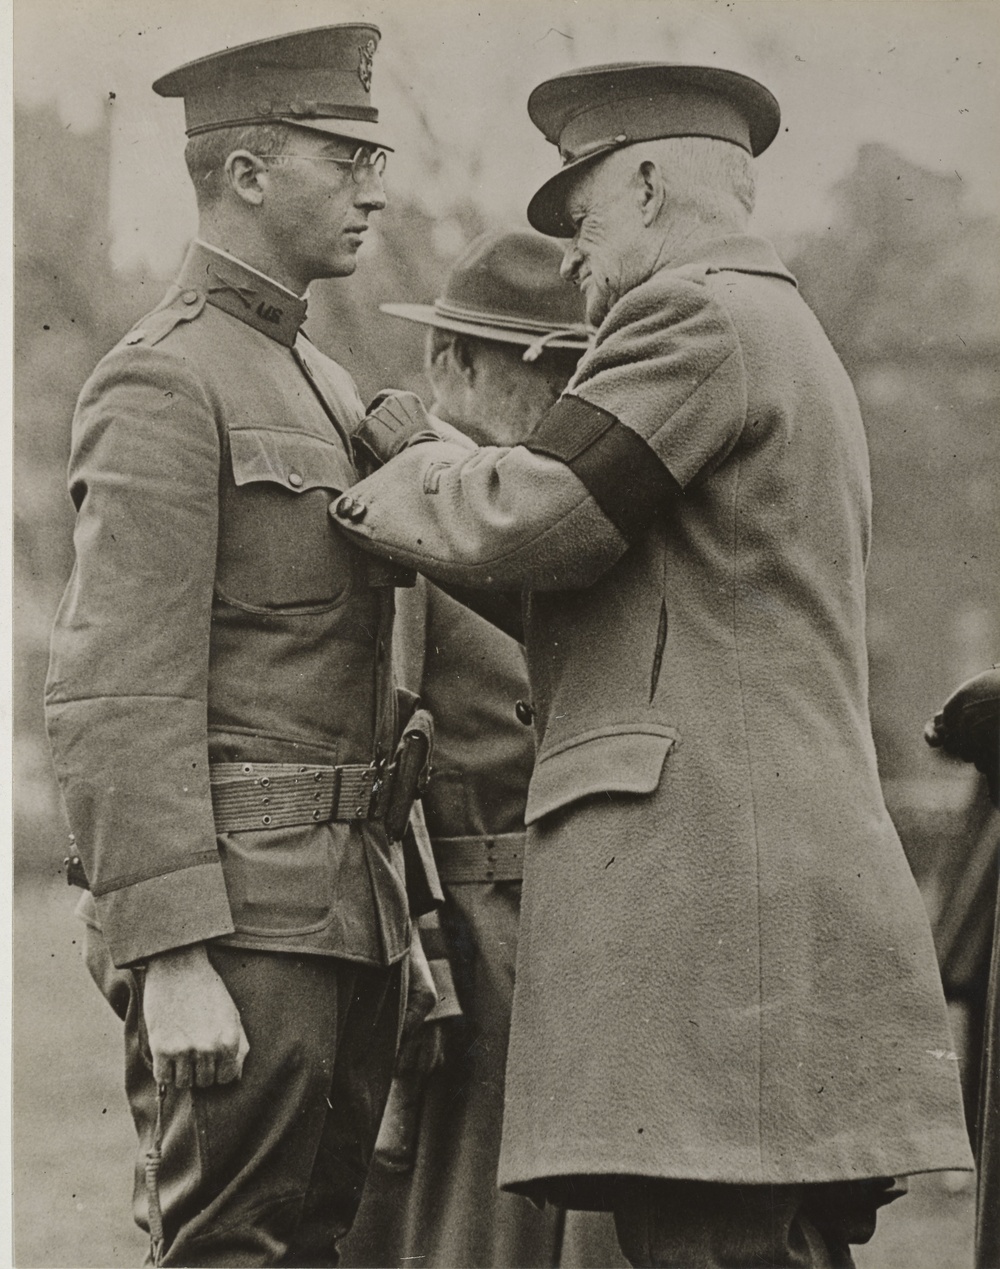 Lt. Col. Charles Whittlesey receives the Medal of Honor